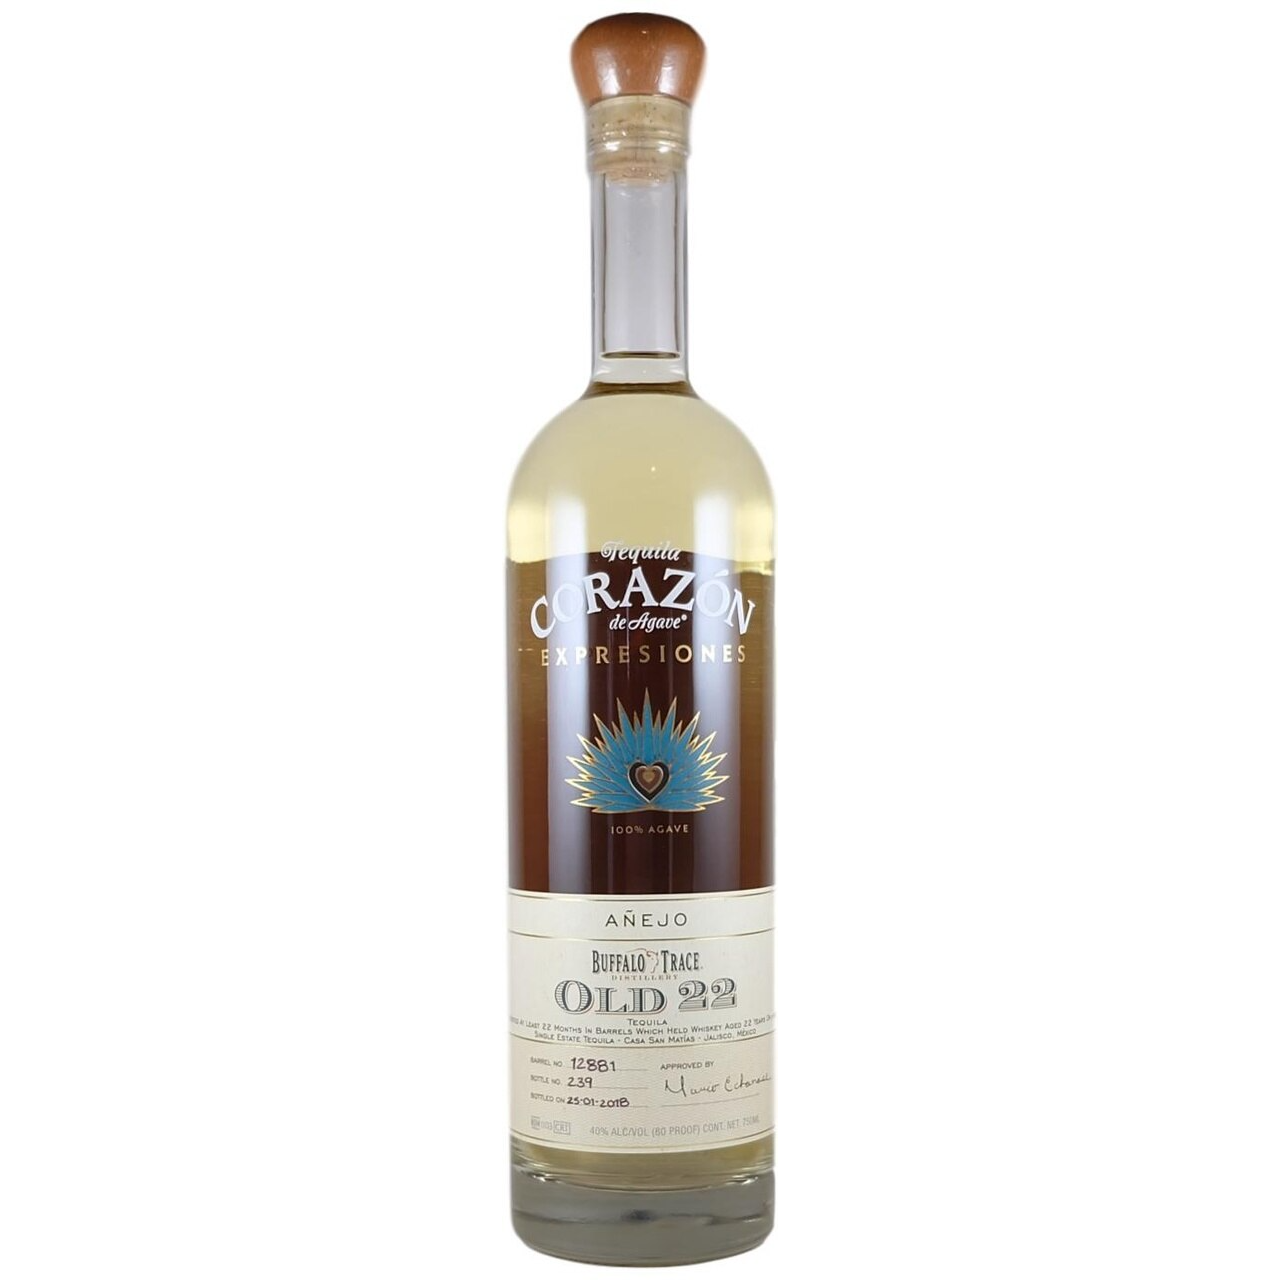 Corazon Expresiones Old 22 Buffalo Trace Anejo Tequila 750ml